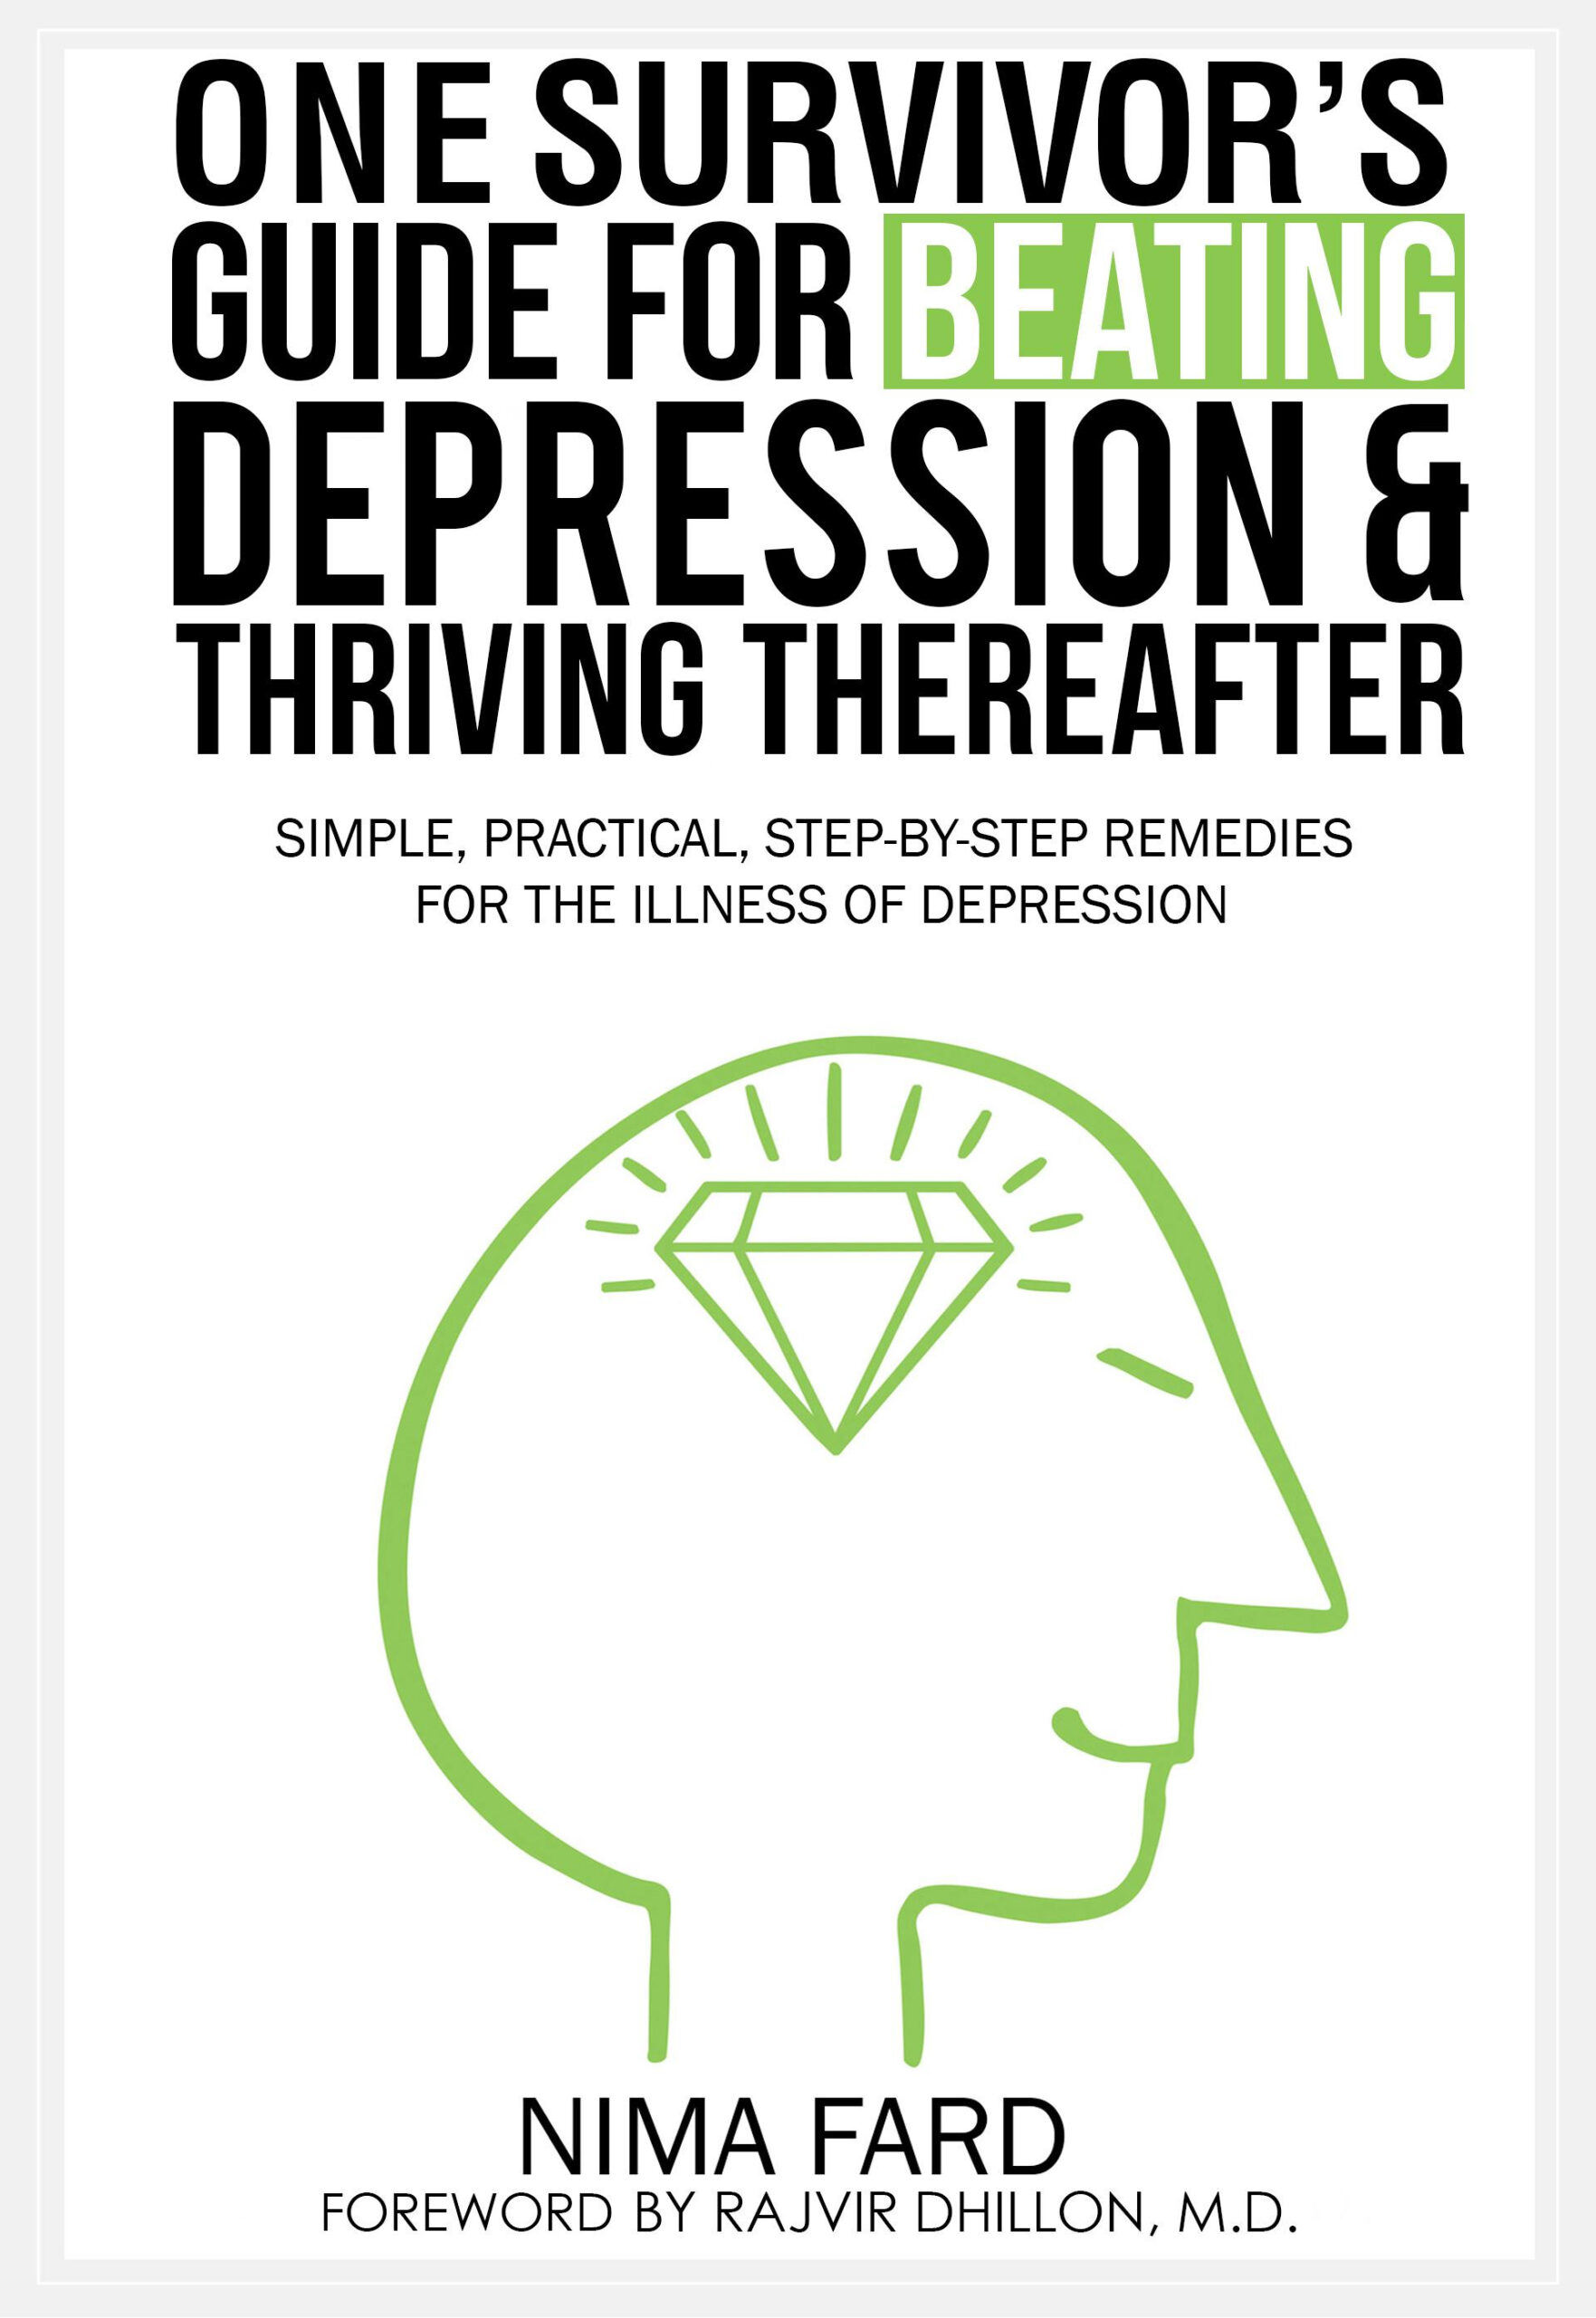 FREE: One Survivor’s Guide for Beating Depression and Thriving Thereafter by Nima Fard